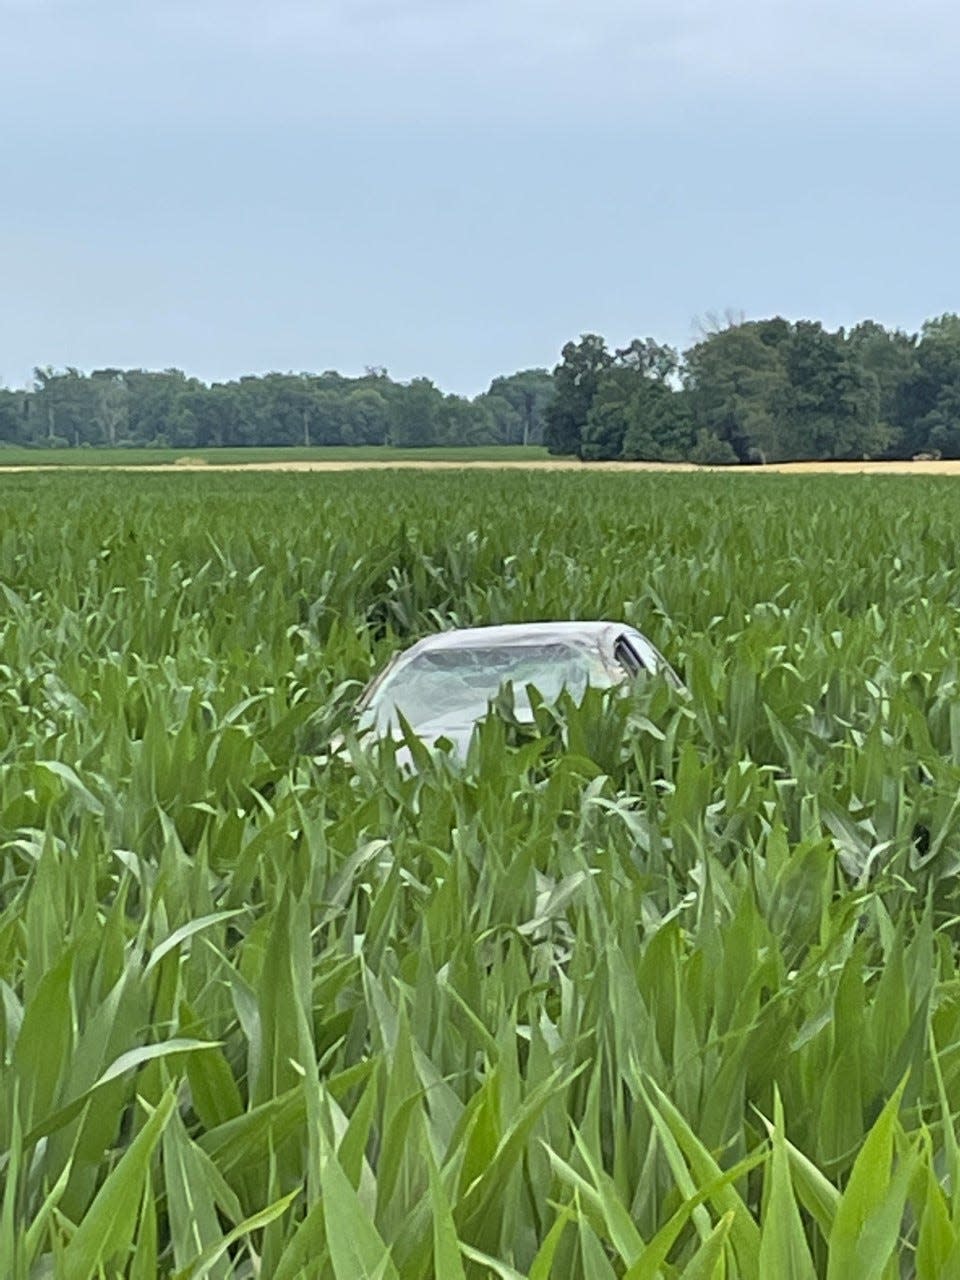 The teenage driver of this Honda Accord lost control on Carroll County Road 200 East. The car left the road, rolled into a cornfield. The driver was killed. Her passenger is in serious condition.